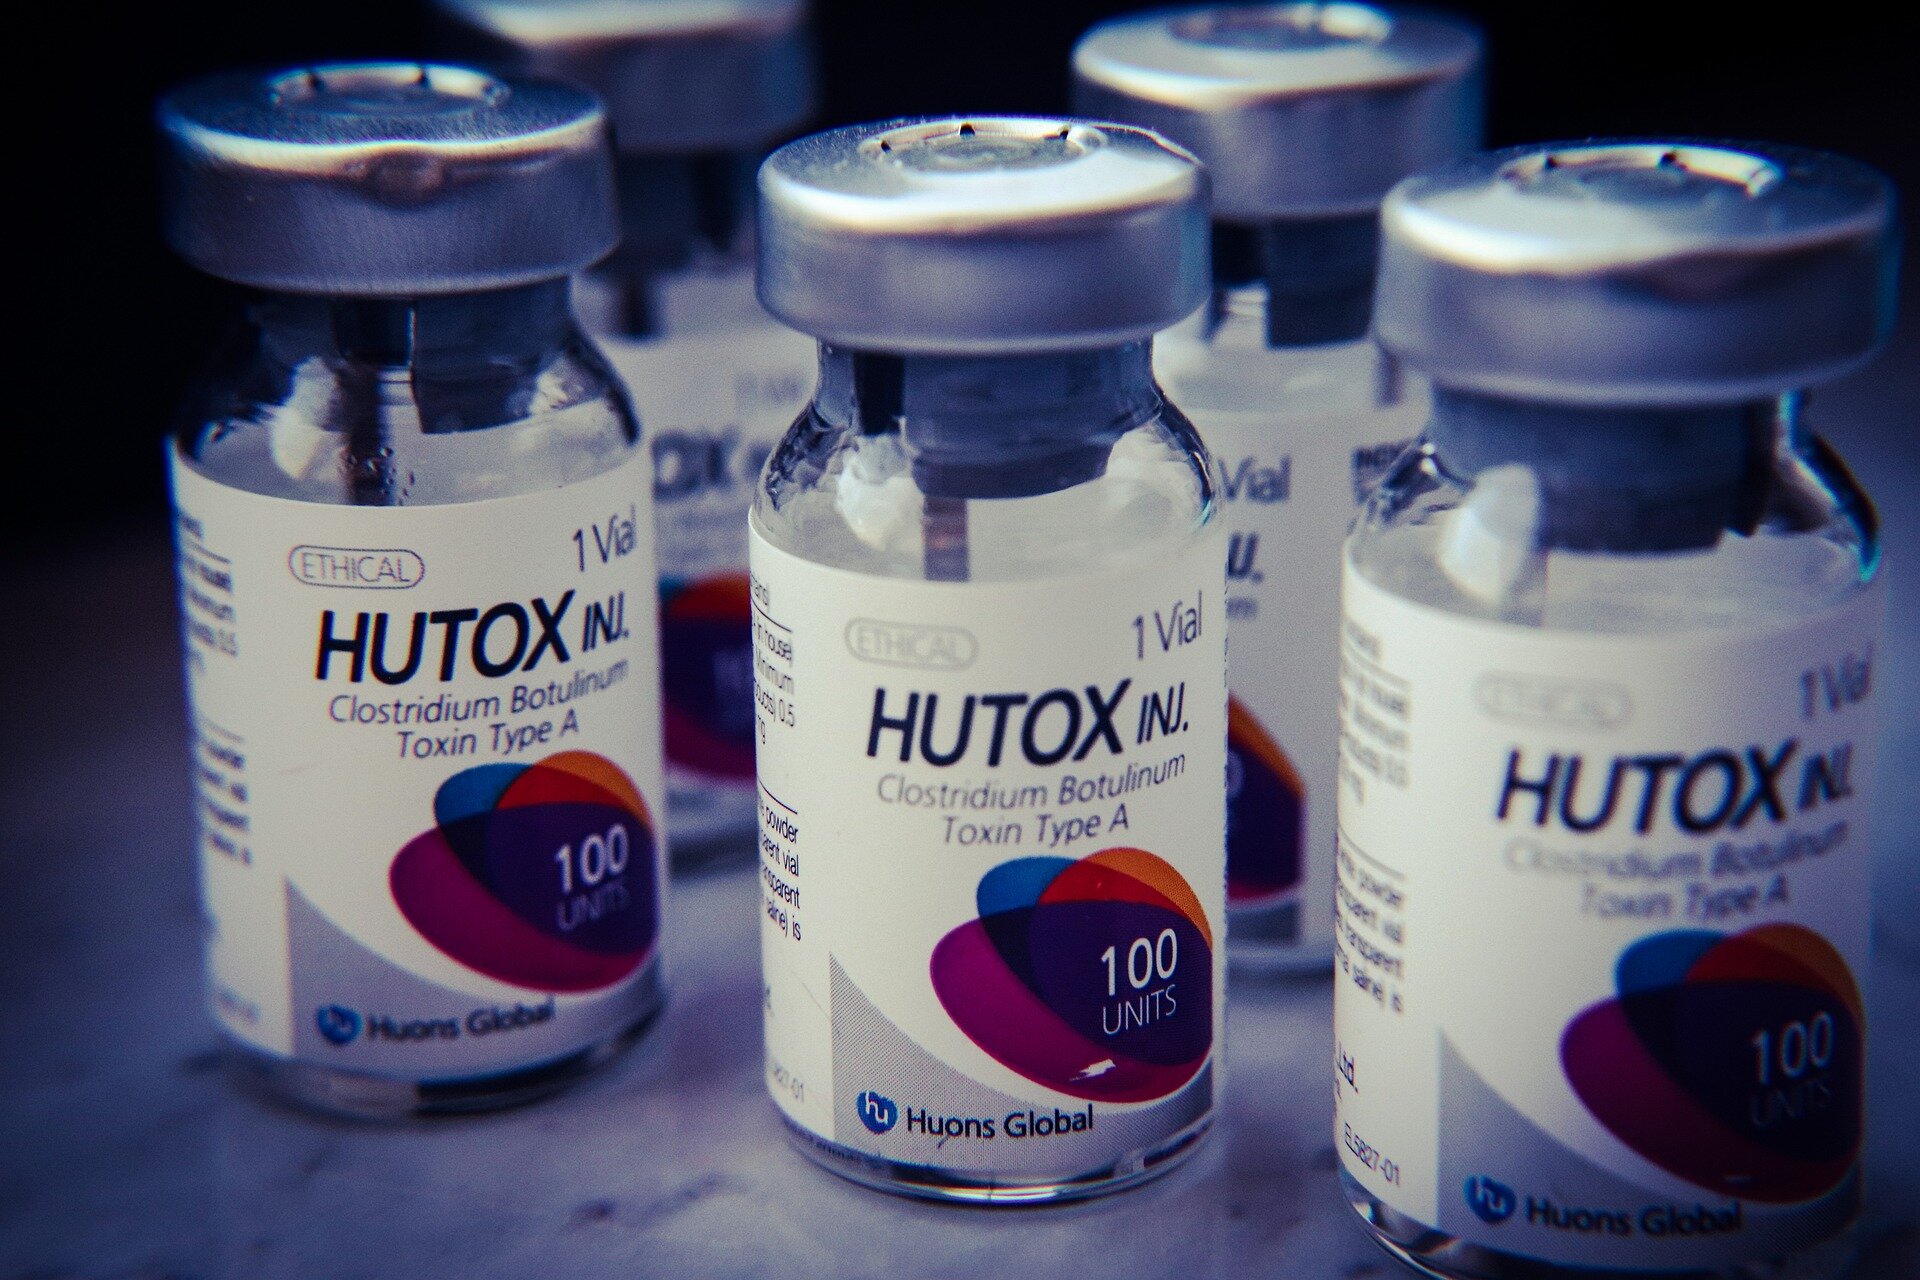 Health officials in the US issue a warning about fake Botox injections